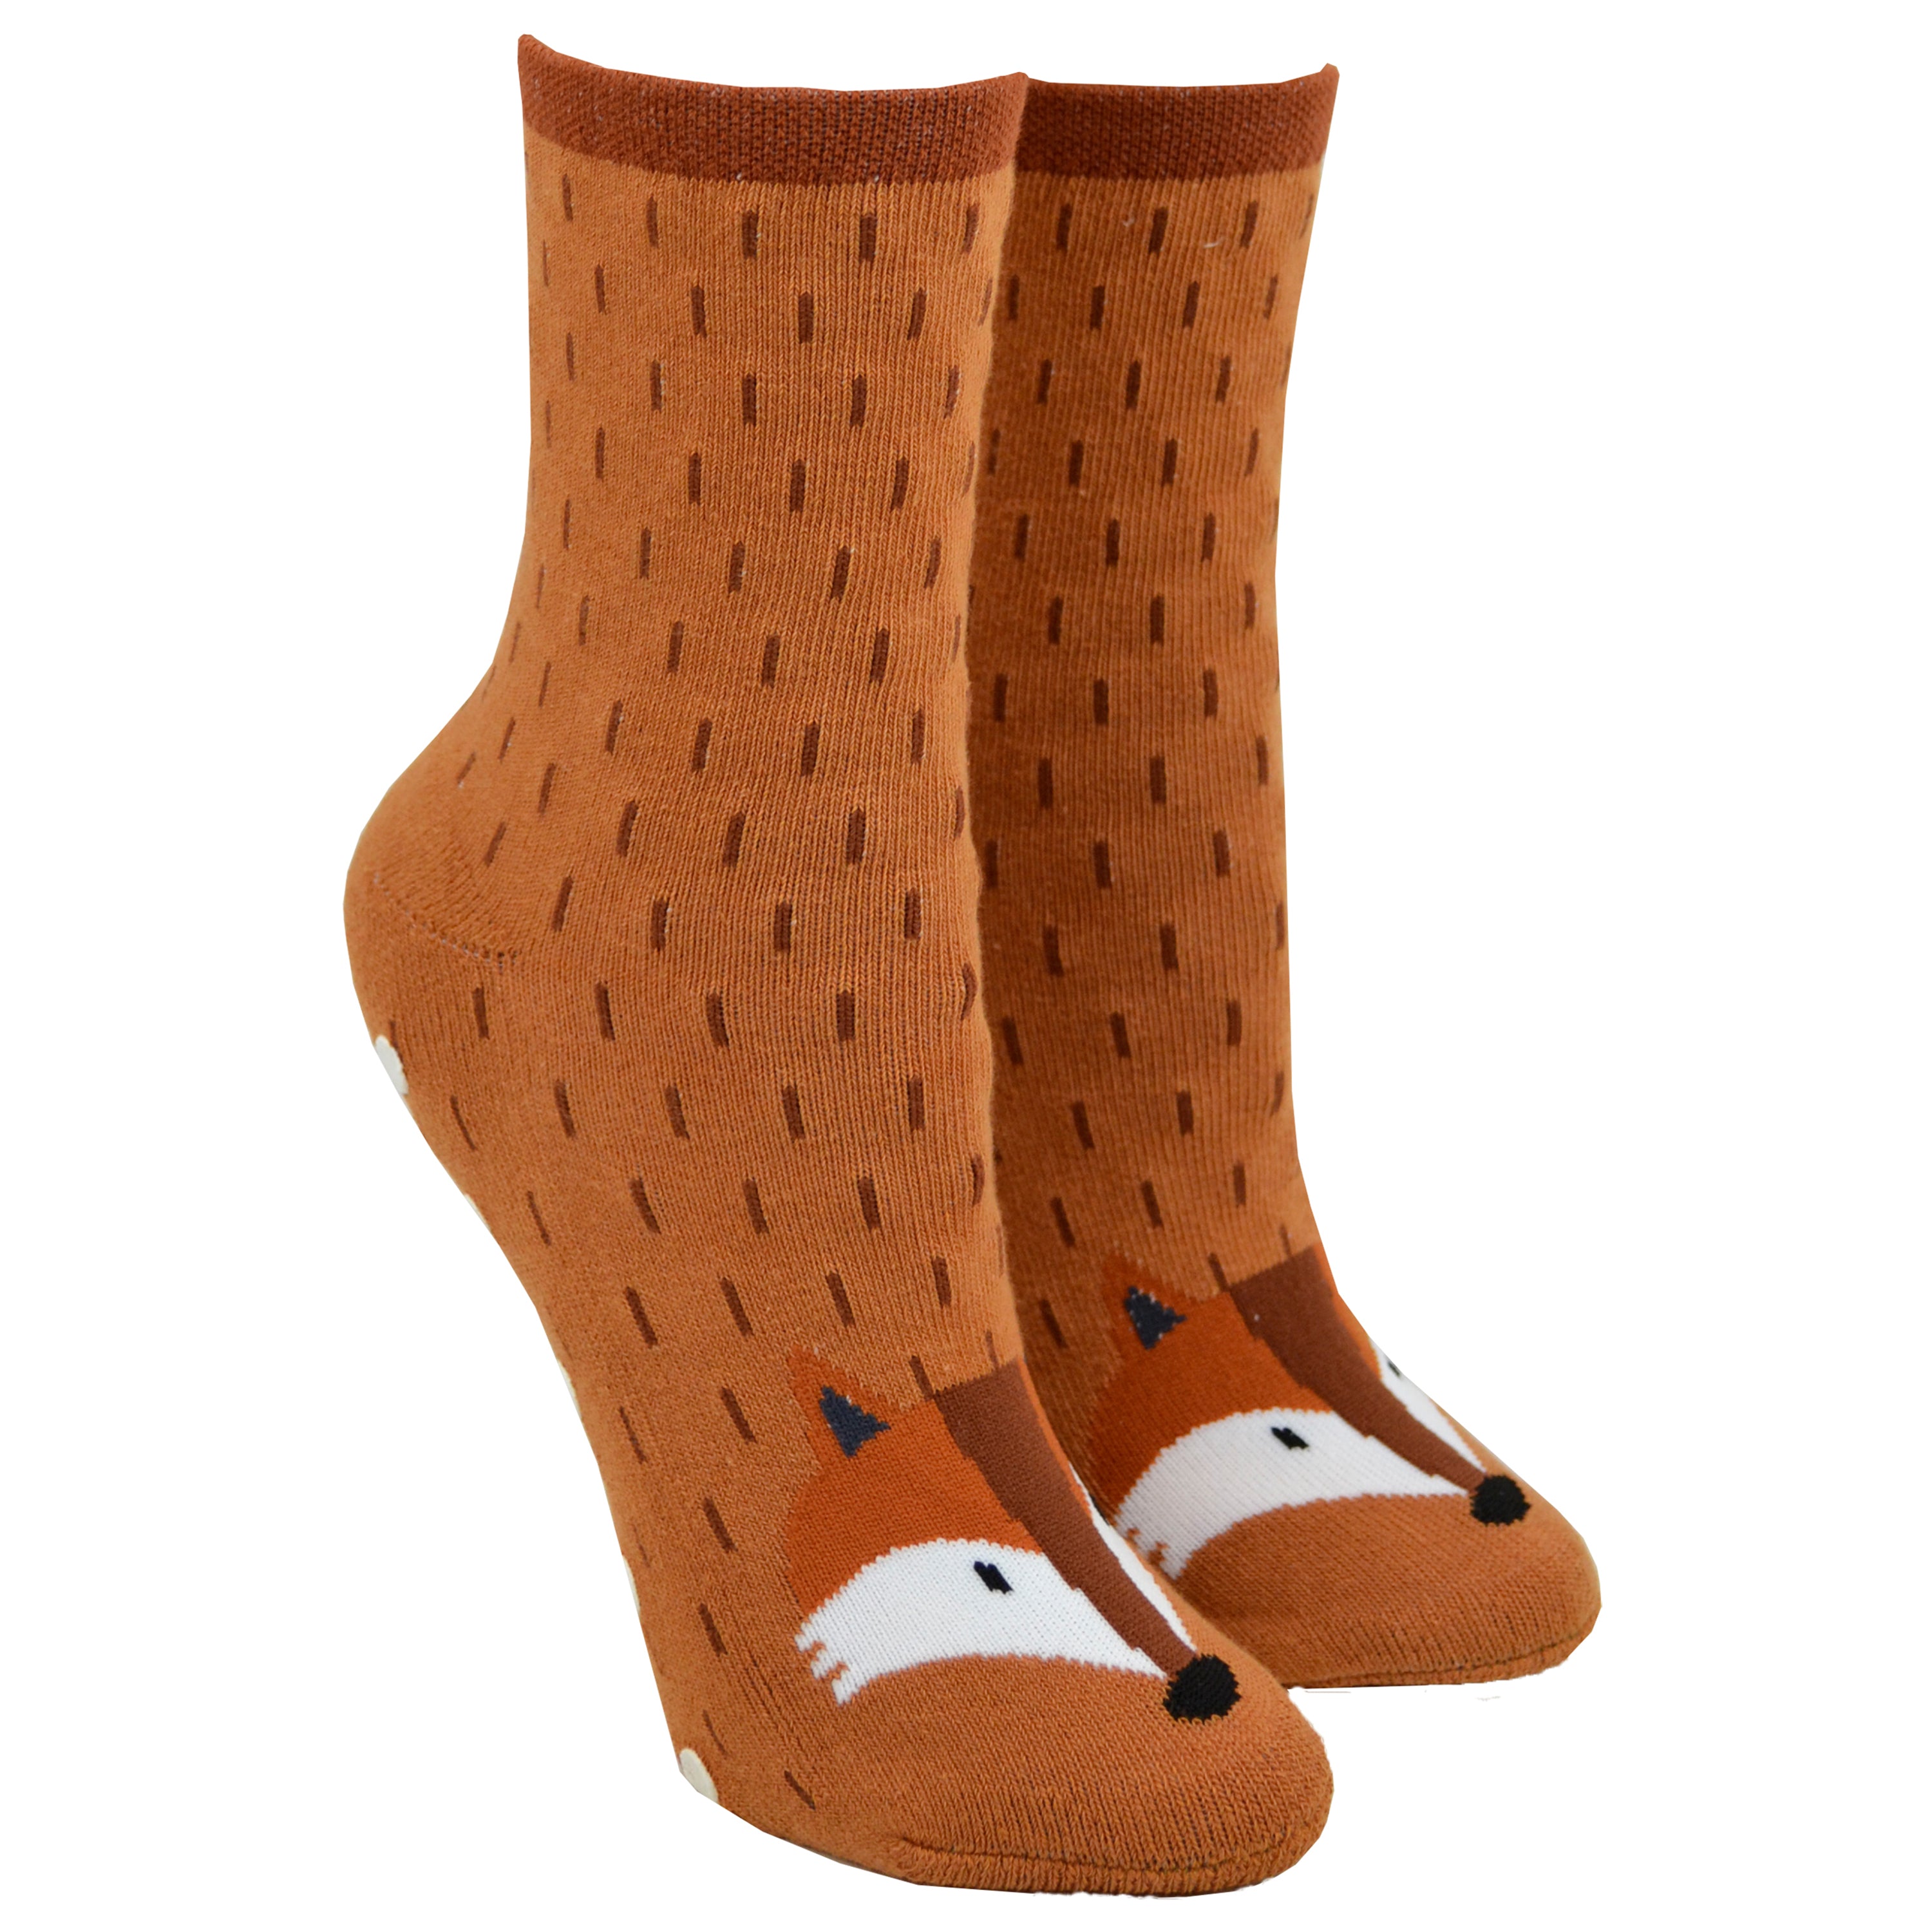 Shown on leg forms, a pair of women's Foot Traffic brand cotton crew length non-skid socks in light brown with a brown cuff and a fox face on the toe.